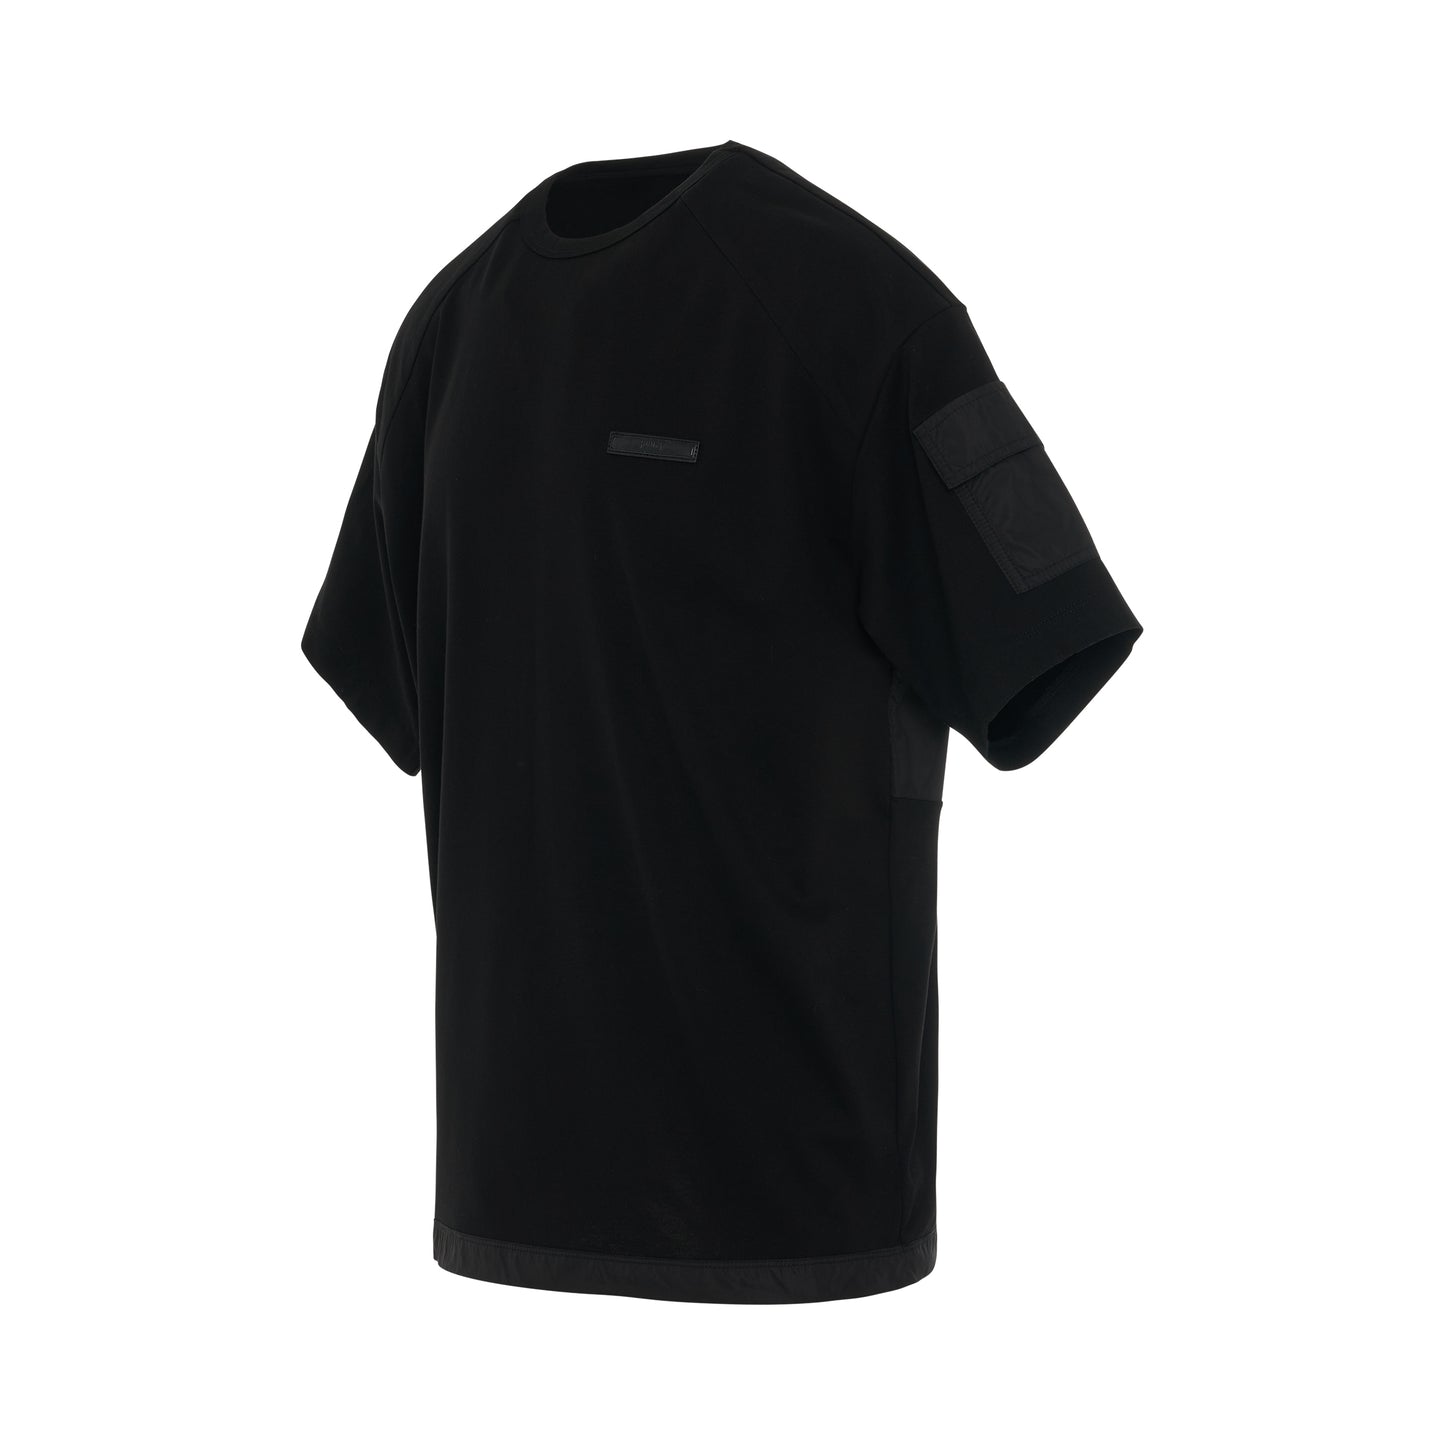 [T-Line] Paneled T-Shirt in Black